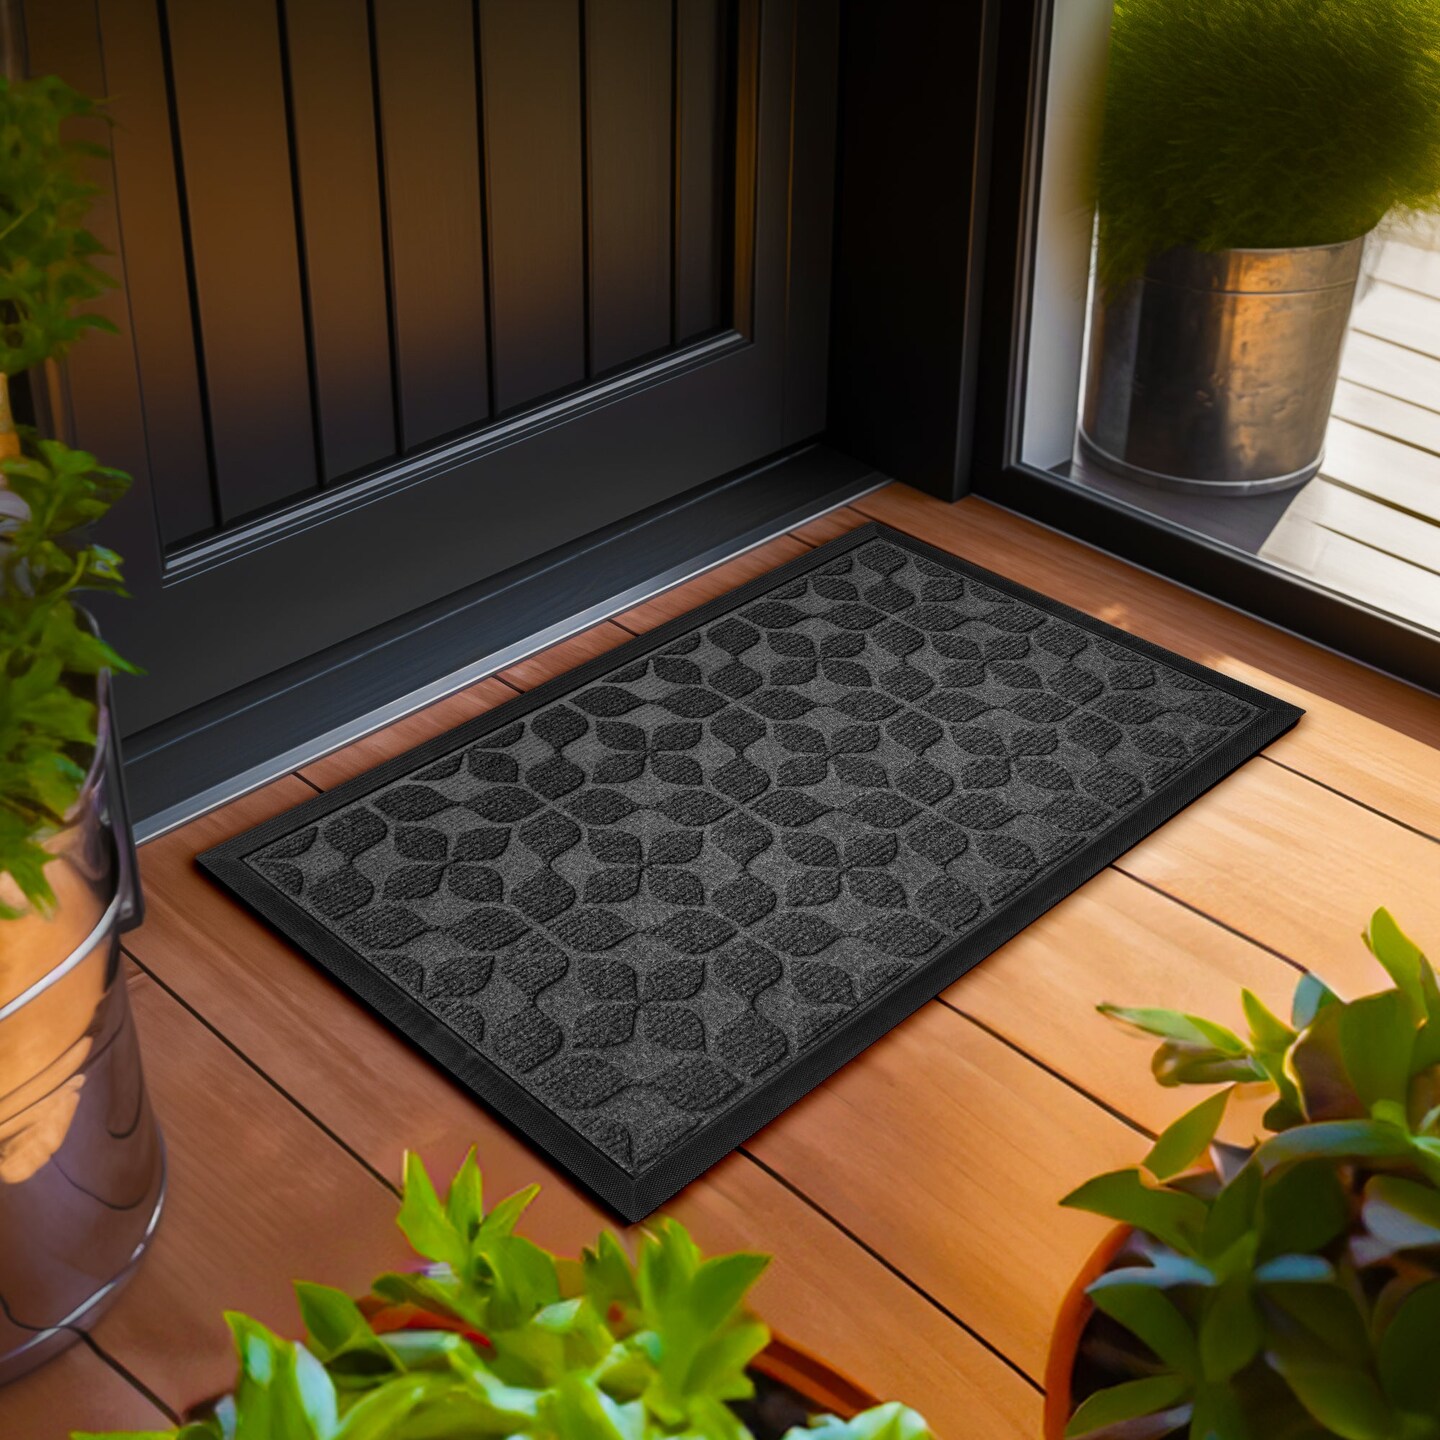 G128 Home Entrance Grey Geometric Floral Pattern Door Mat | 17x29.5 In | Thick Absorbent Natural Rubber Non Slip, Indoor/Outdoor, Easy Clean, Welcome Mats for Front Door/Patio/Garage